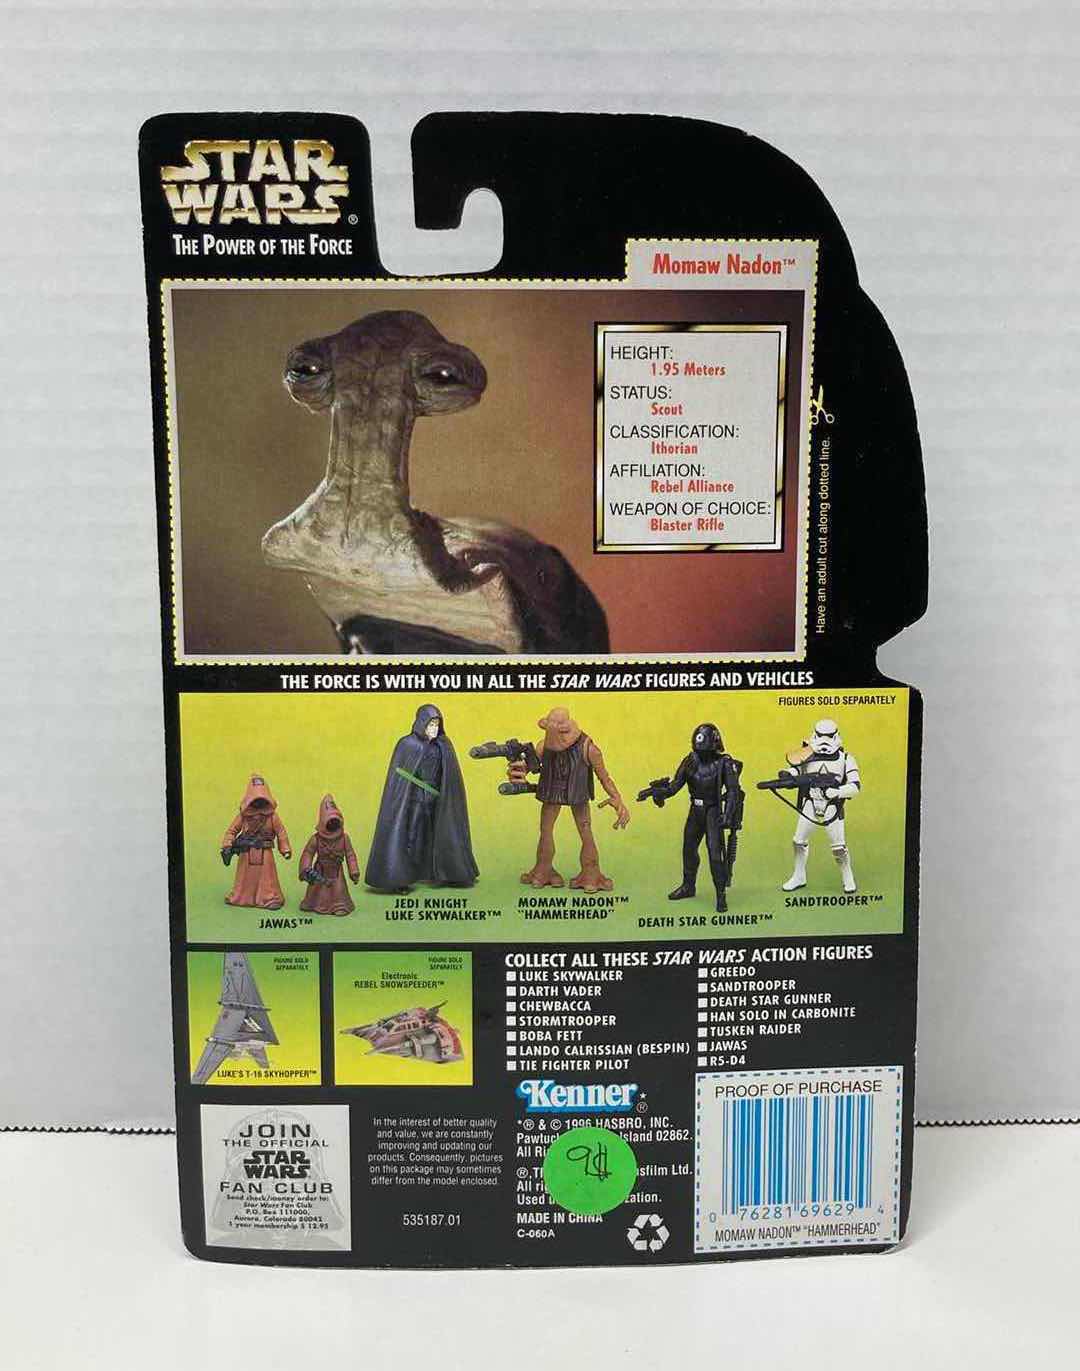 Photo 2 of NEW STAR WARS THE POWER OF THE FORCE ACTION FIGURE, MOMAW NADON “HAMMERHEAD” W DOUBLE-BARRELED BLASTER RIFLE